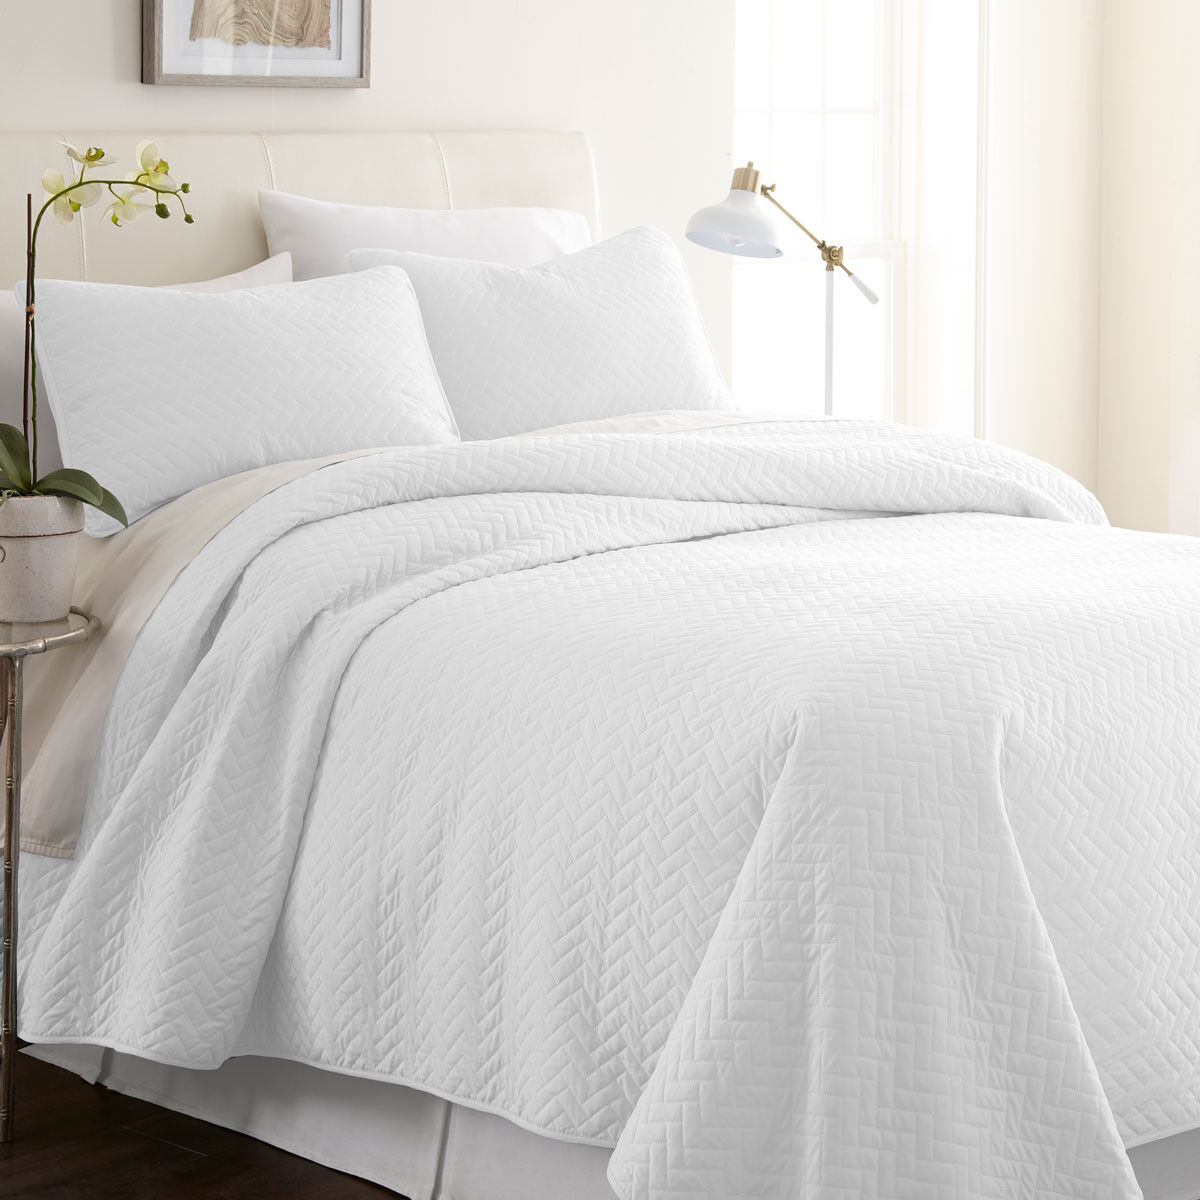 Where is the 3-Piece Herring Quilted Coverlet Set shipped from and the estimated delivery time?